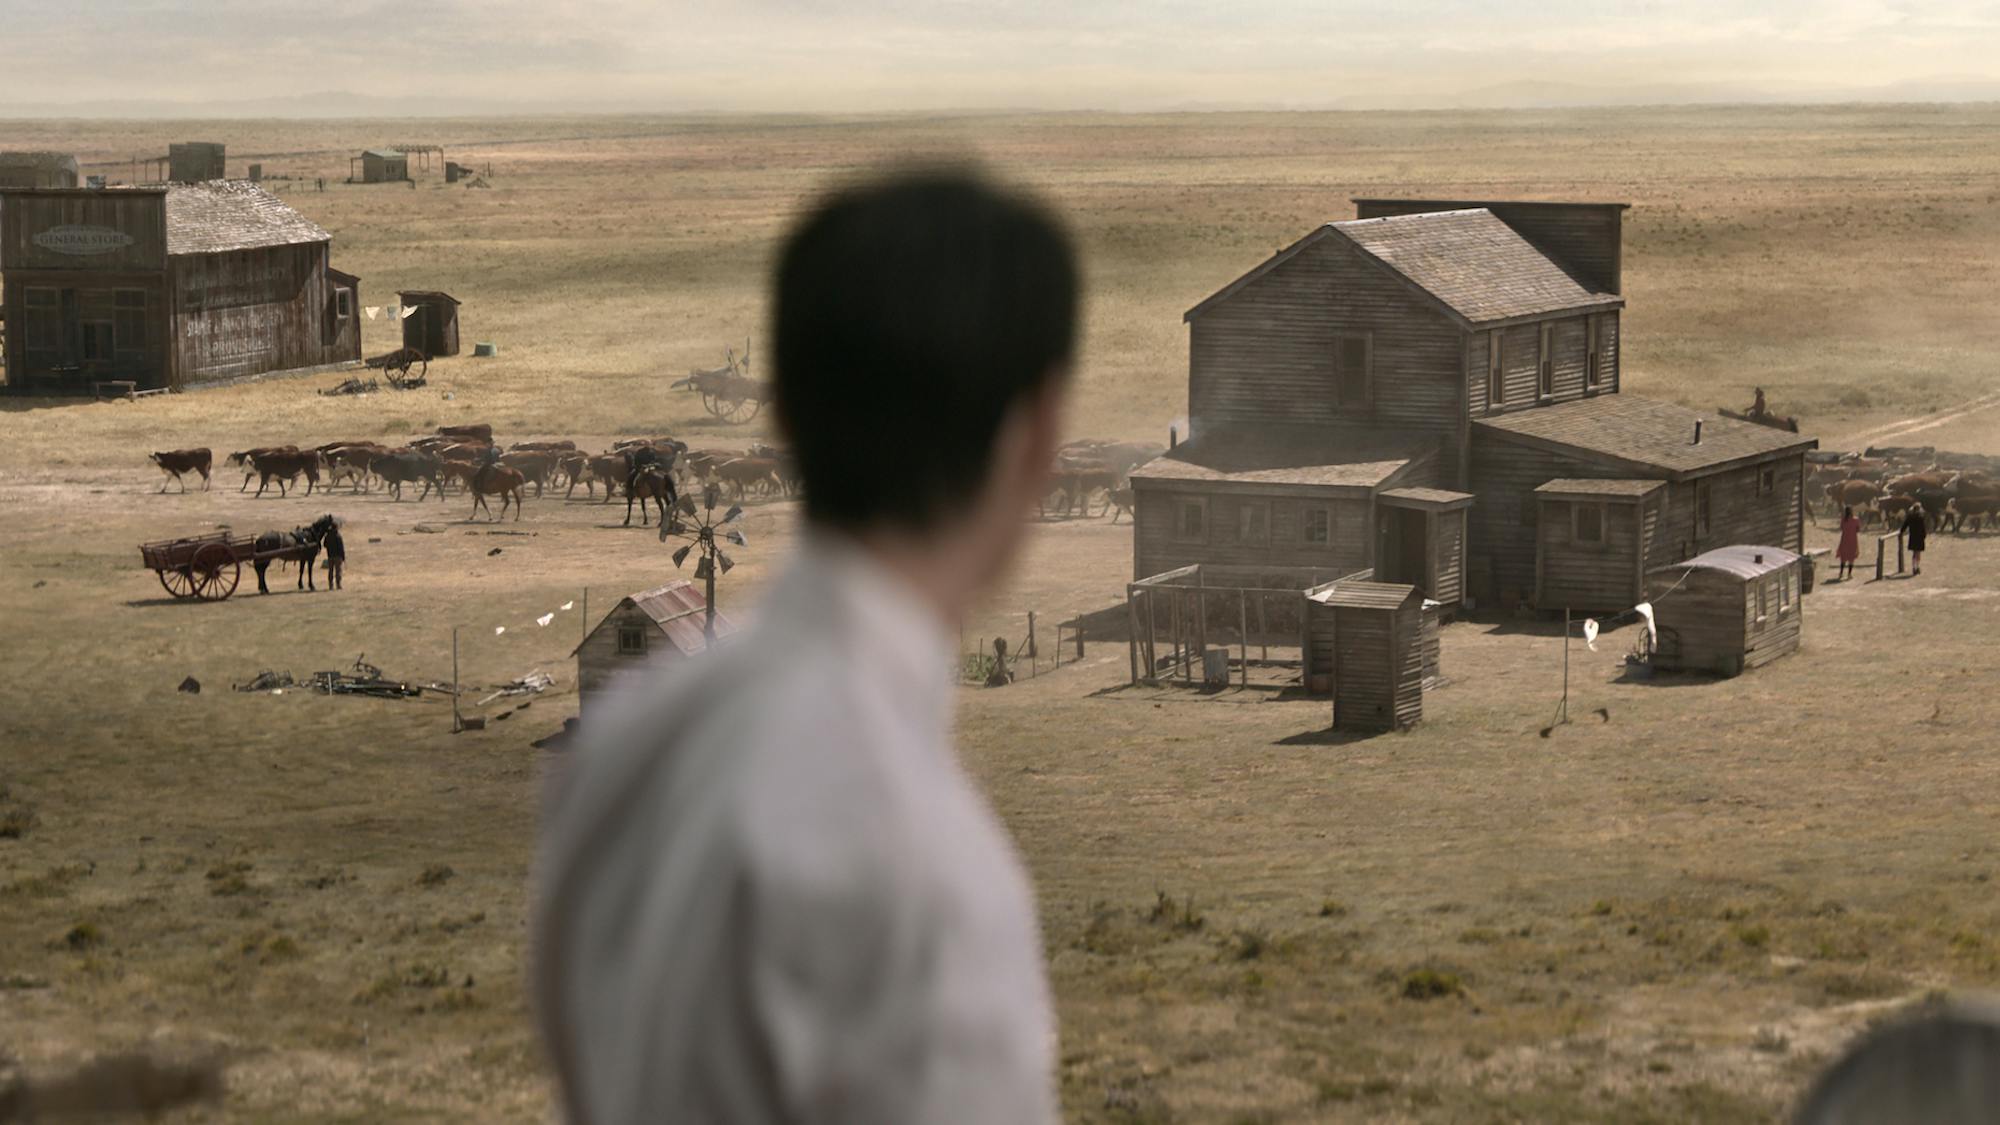 Peter Gordon (Kodi Smit-McPhee) stands in the middle of a dusty ranch. He looks over at some barns, animals, and people.